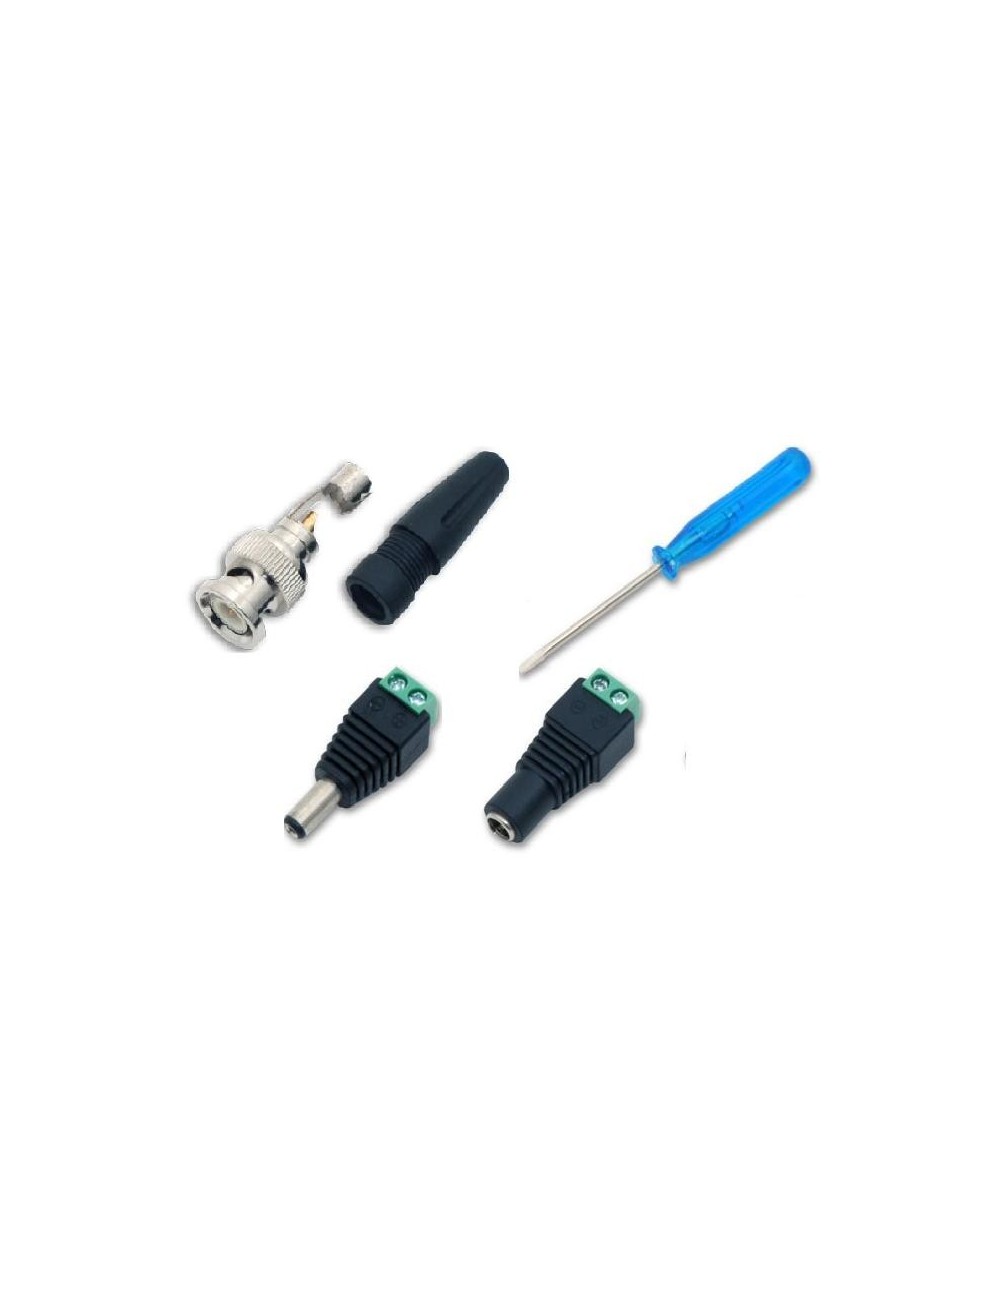 KIT-M4 for wiring with screw connectors